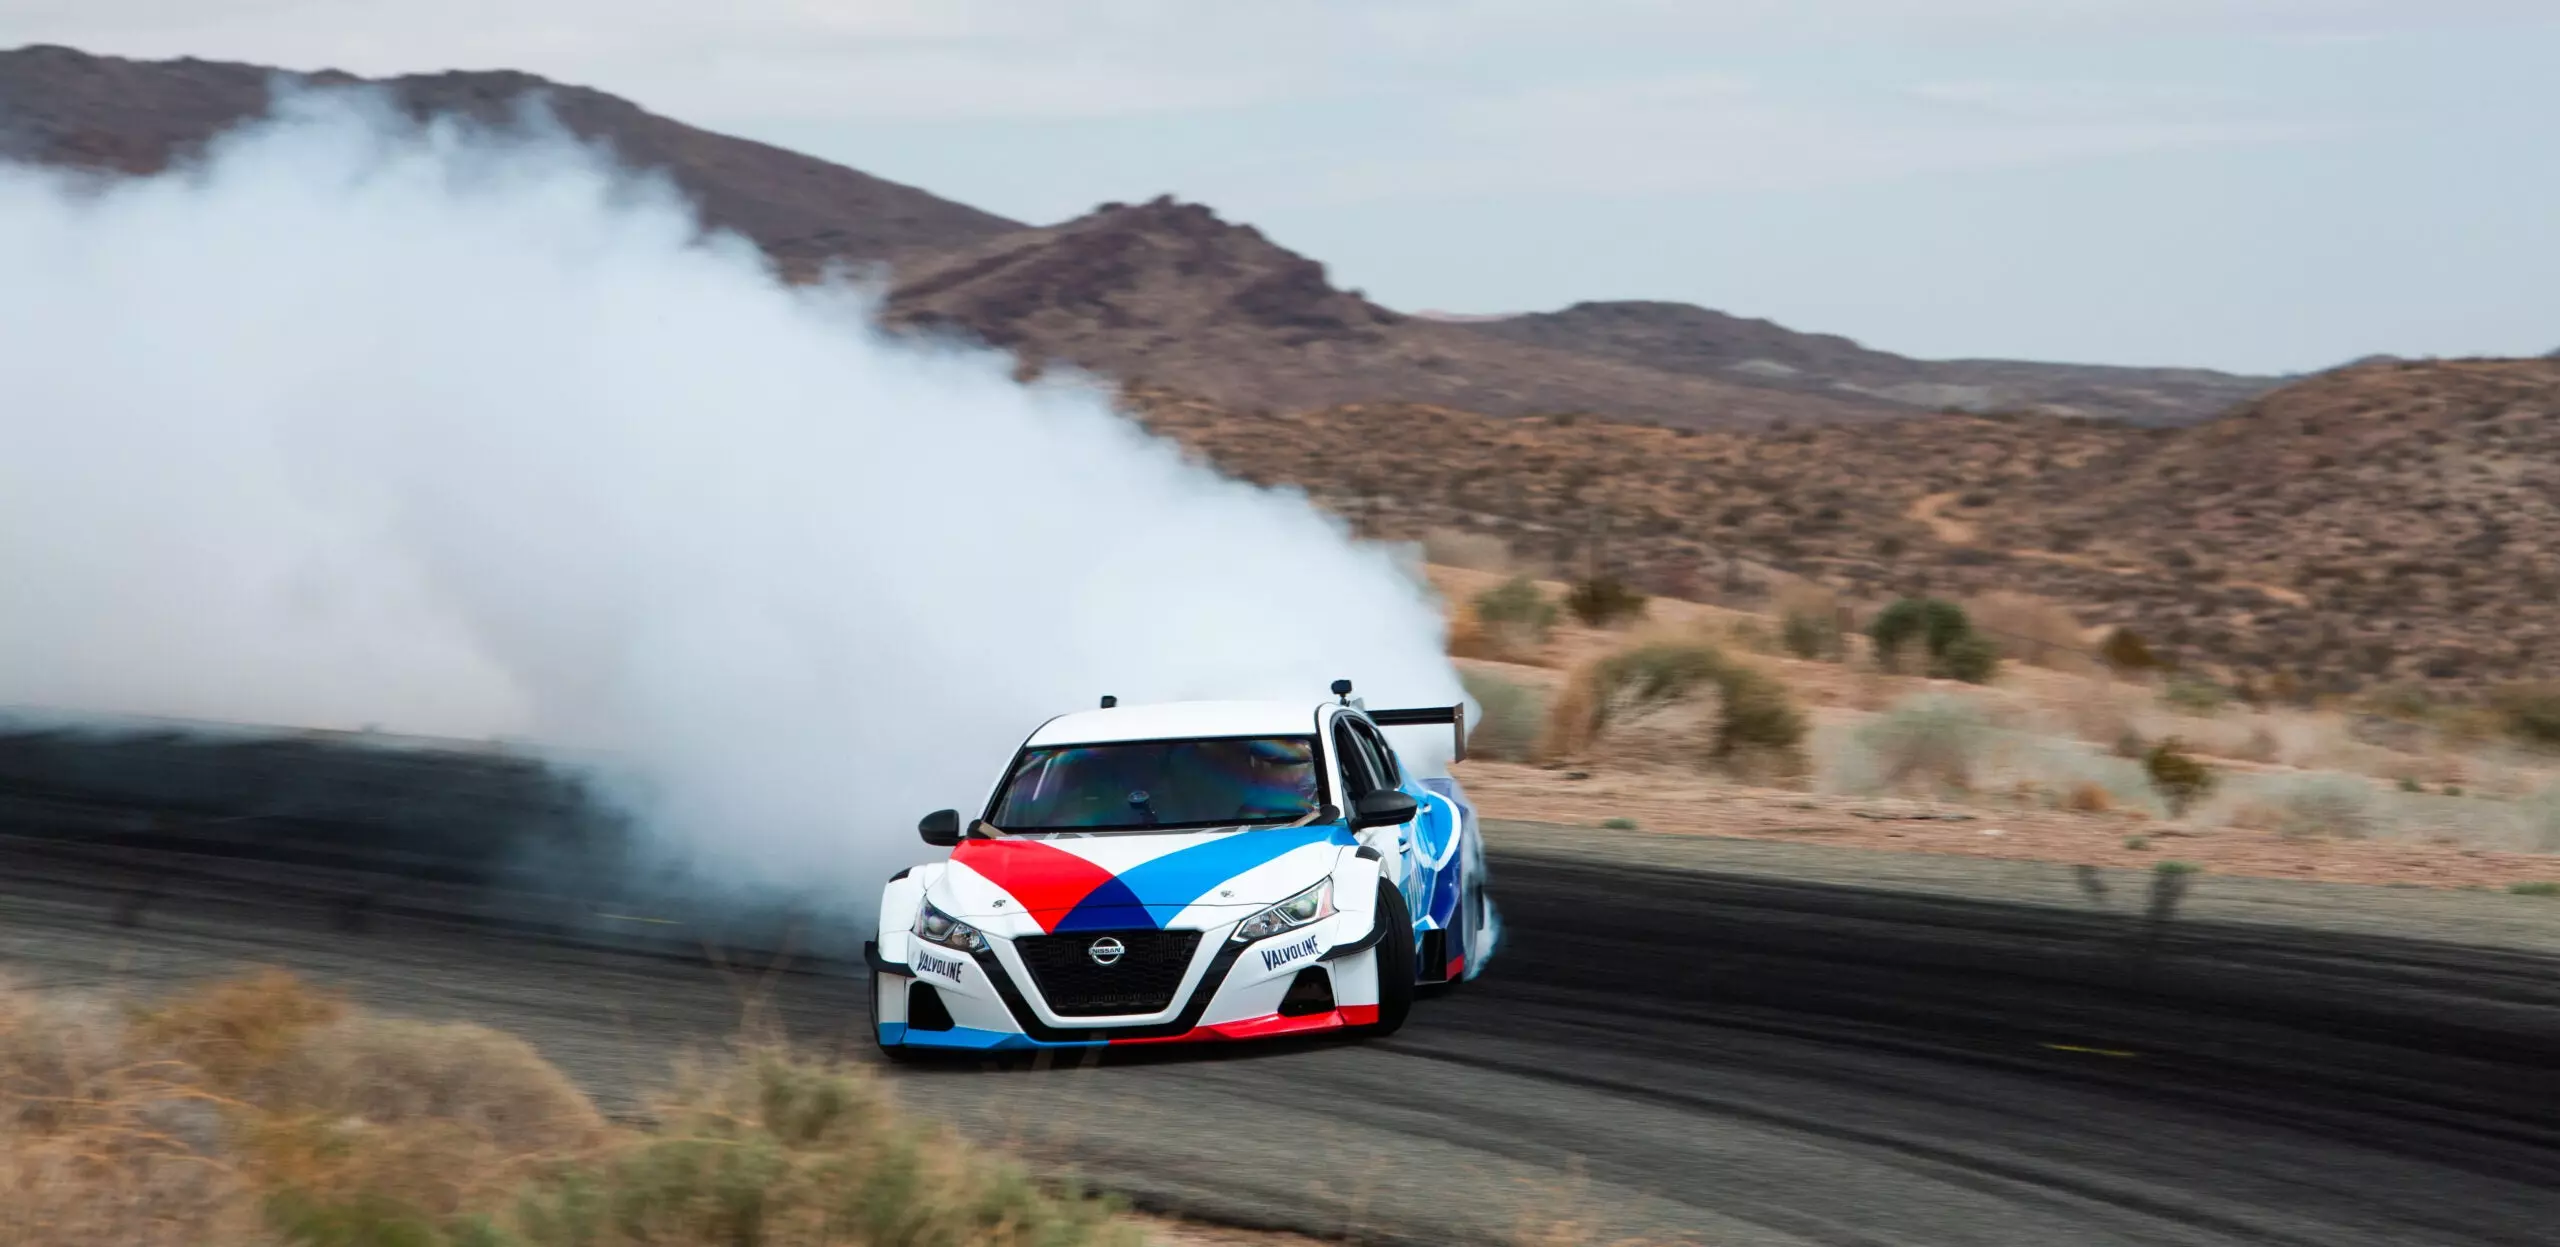 Check Out the Ultimate Drift Taxi in Action